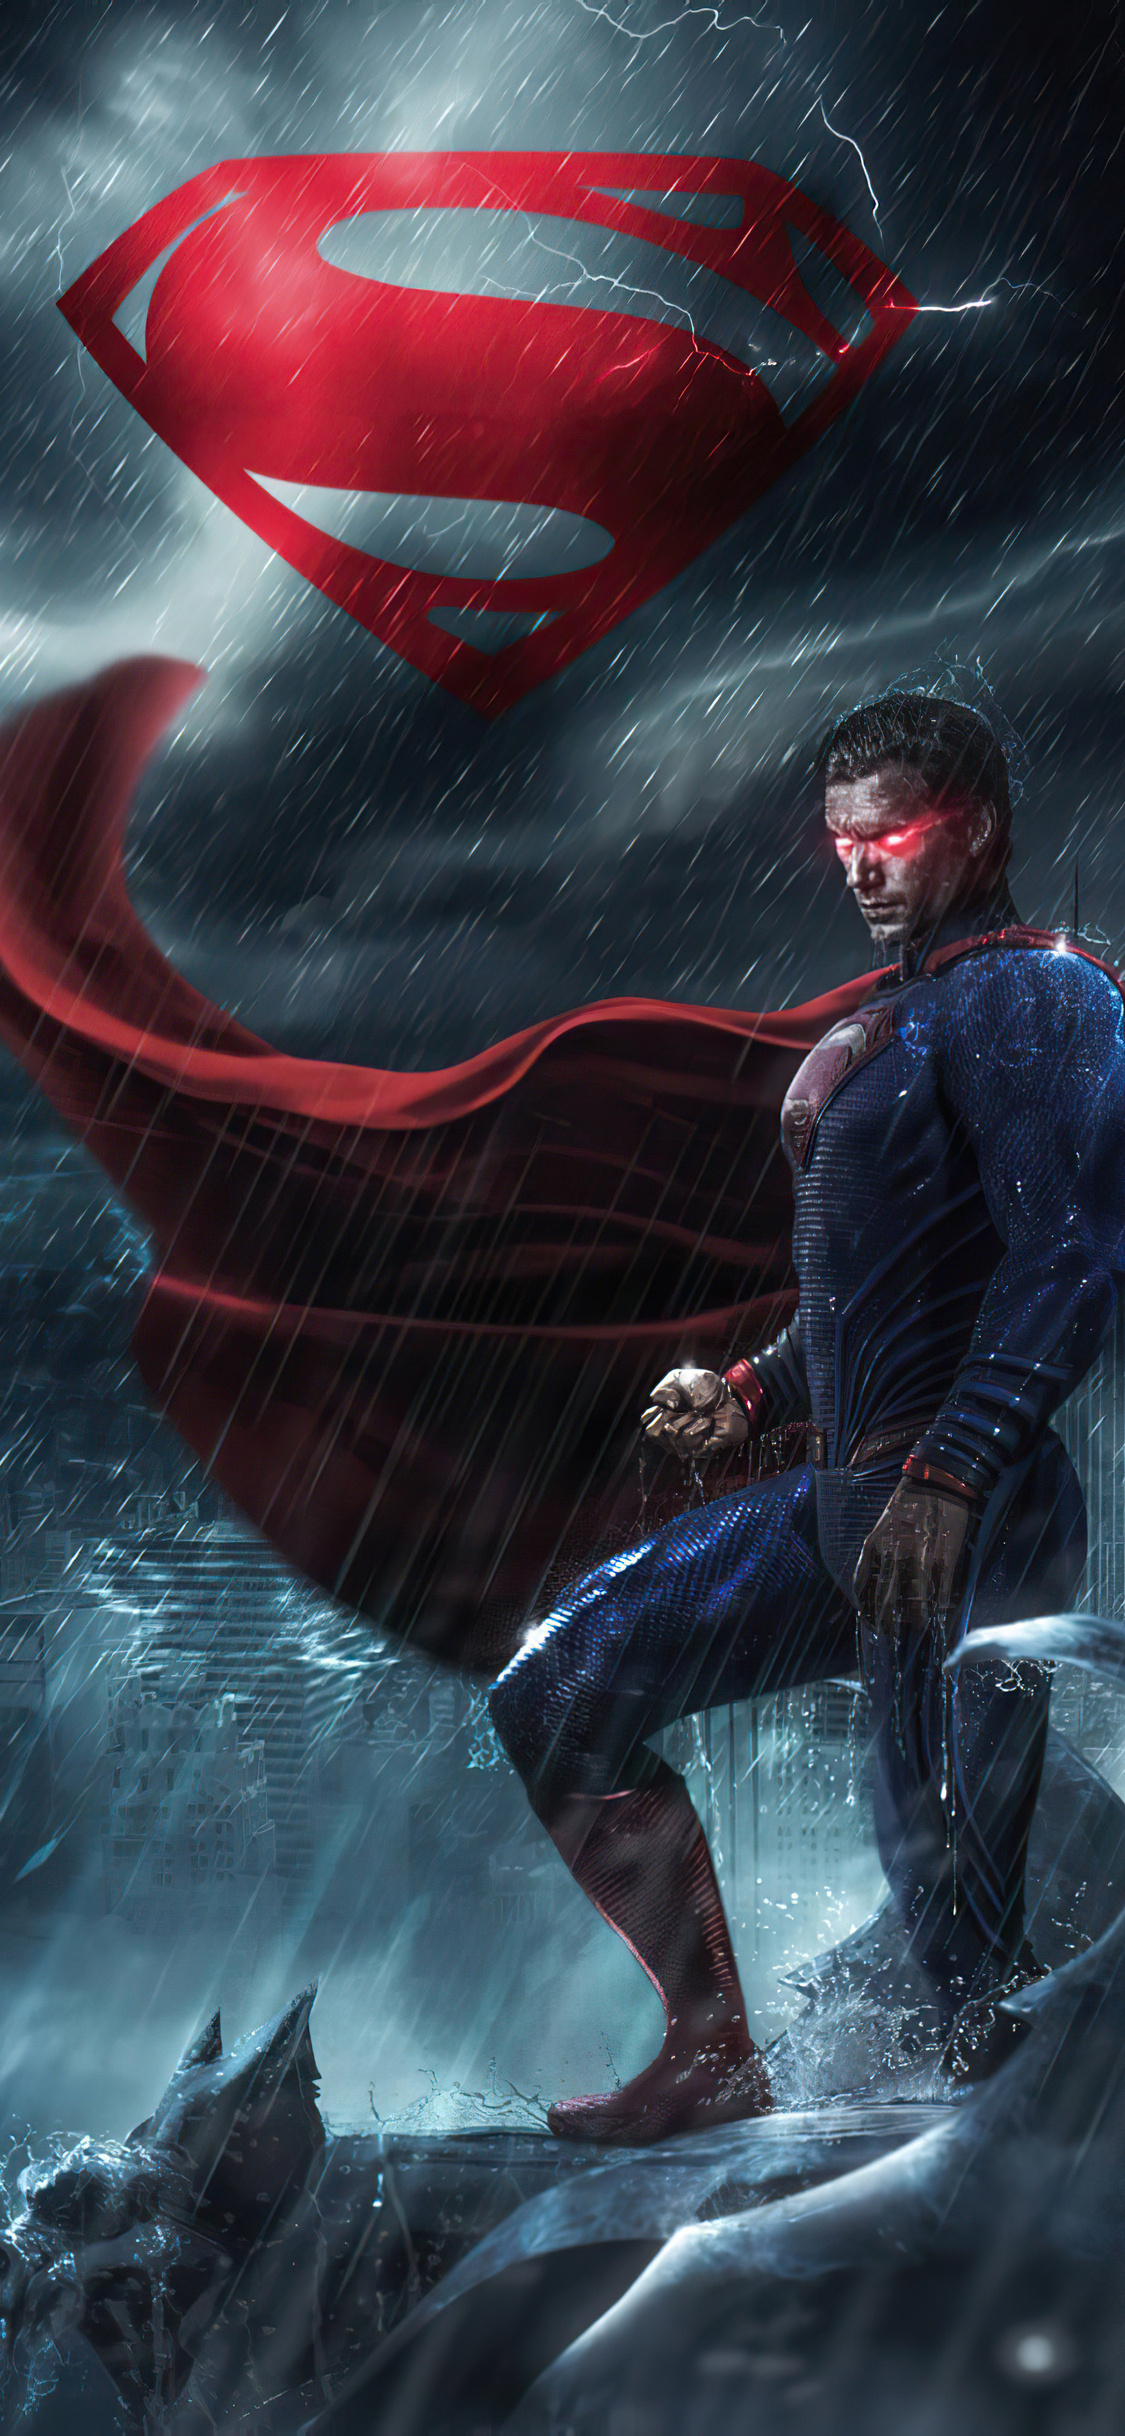 Man of Steel, Superman sequel, iPhone wallpapers, High definition visuals, 1130x2440 HD Handy